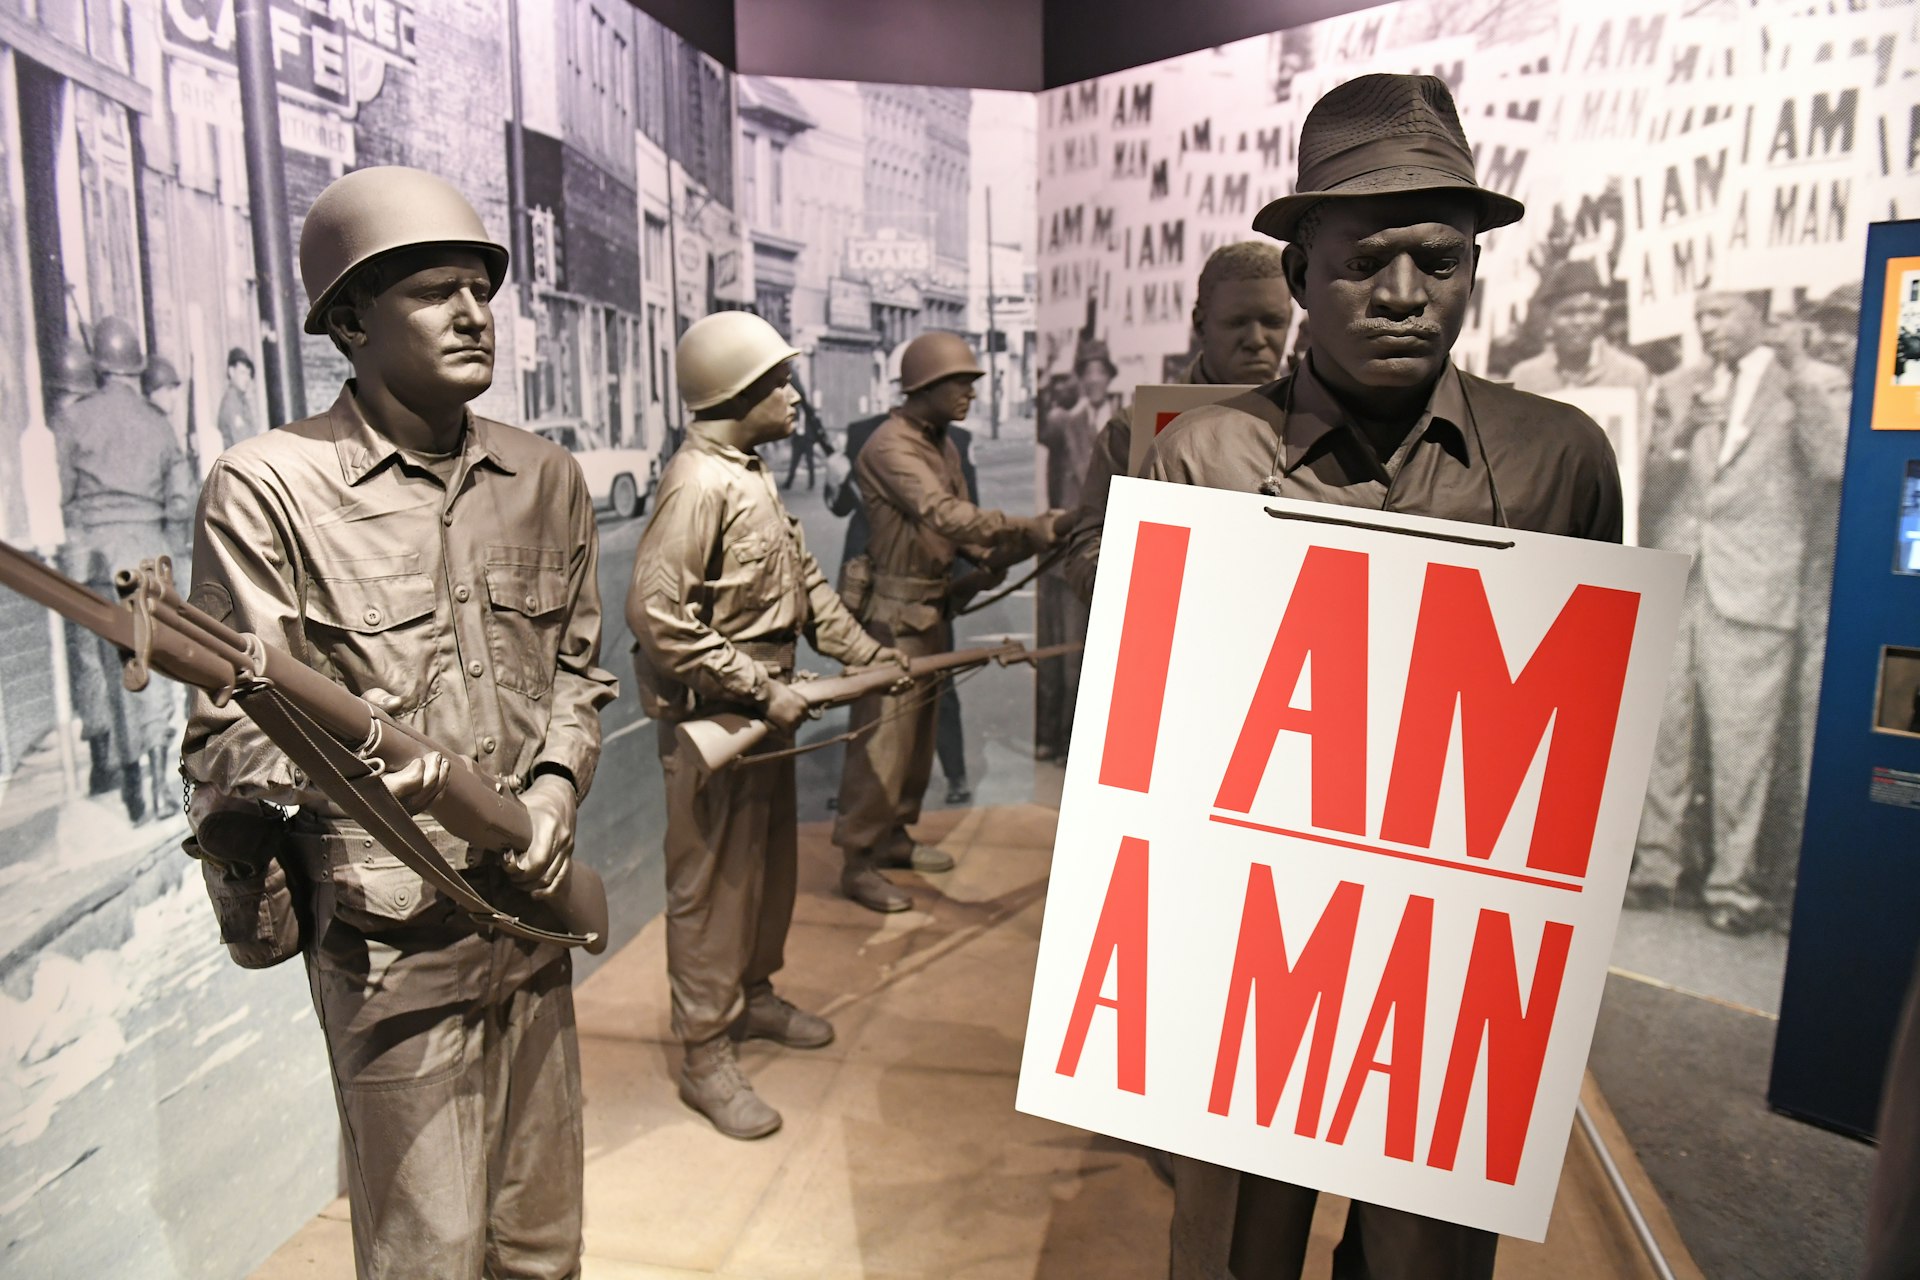 I Am A Man exhibit at the National Civil Rights Museum, Memphis, Tennessee, USA